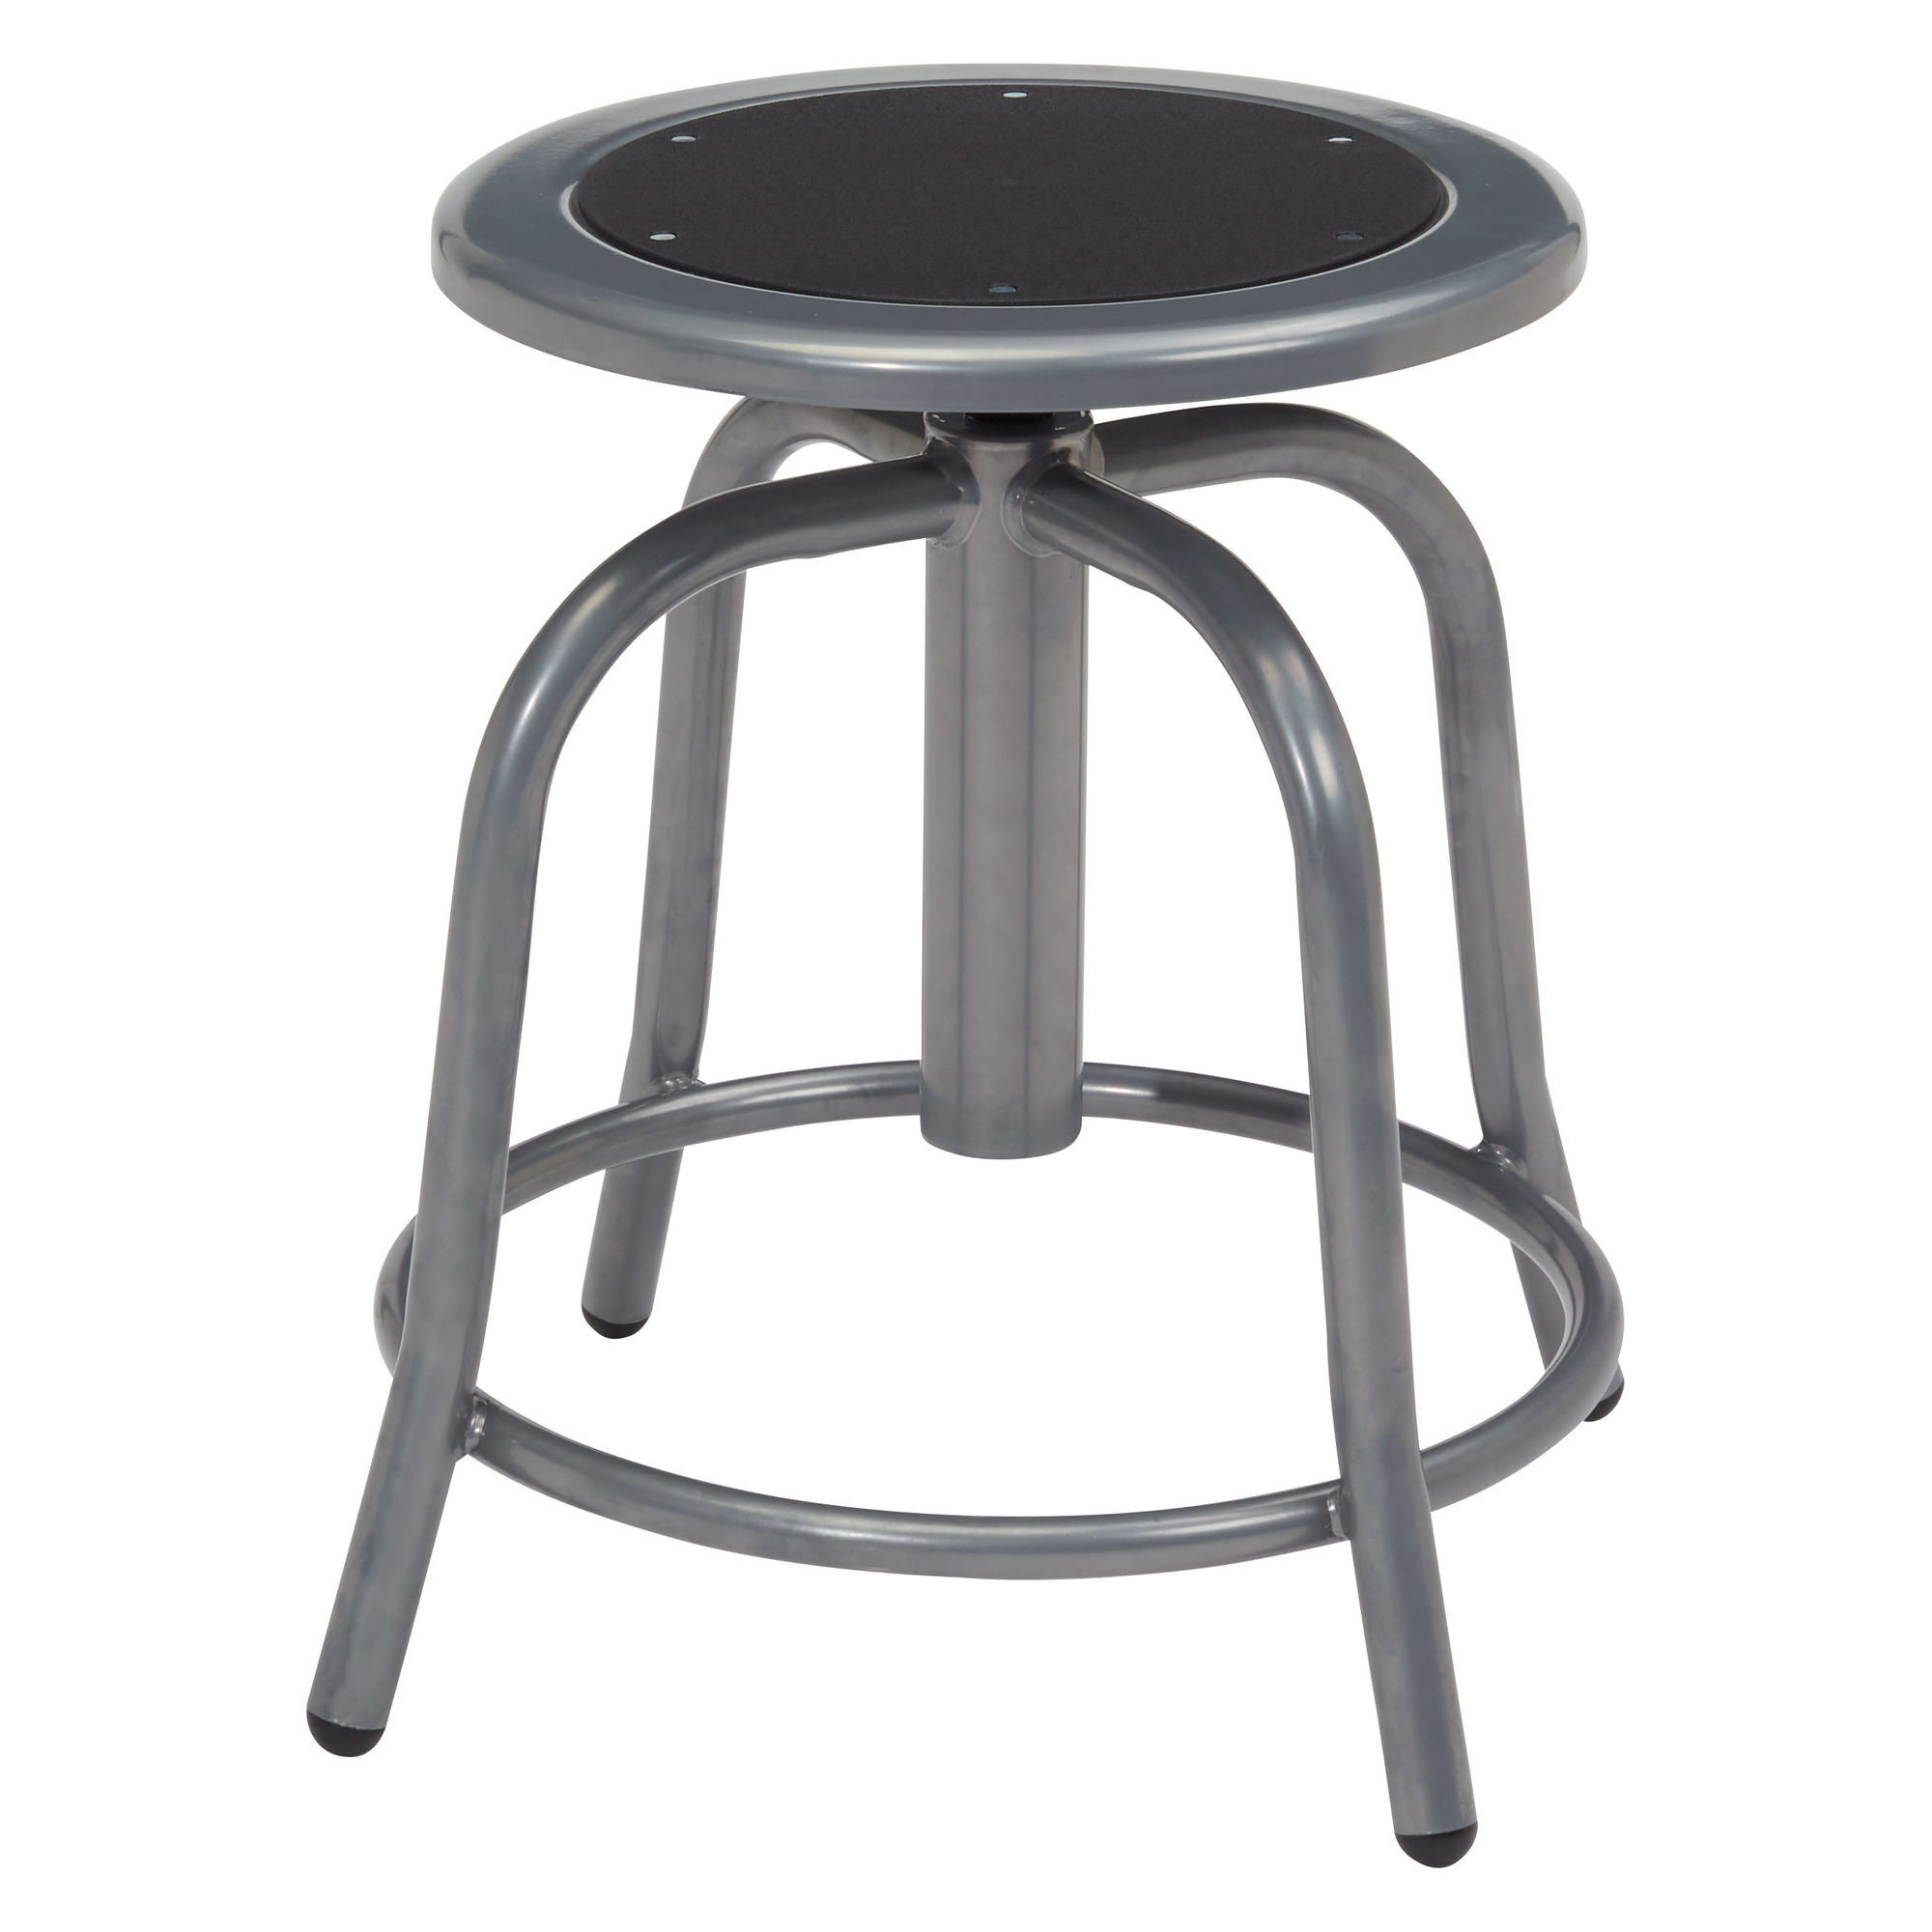 National Public Seating, 18â - 24â Height Adjust Swivel Stool, Primary Color Black, Included (qty.) 1, Seating Type Office Stool, Model 6810-02